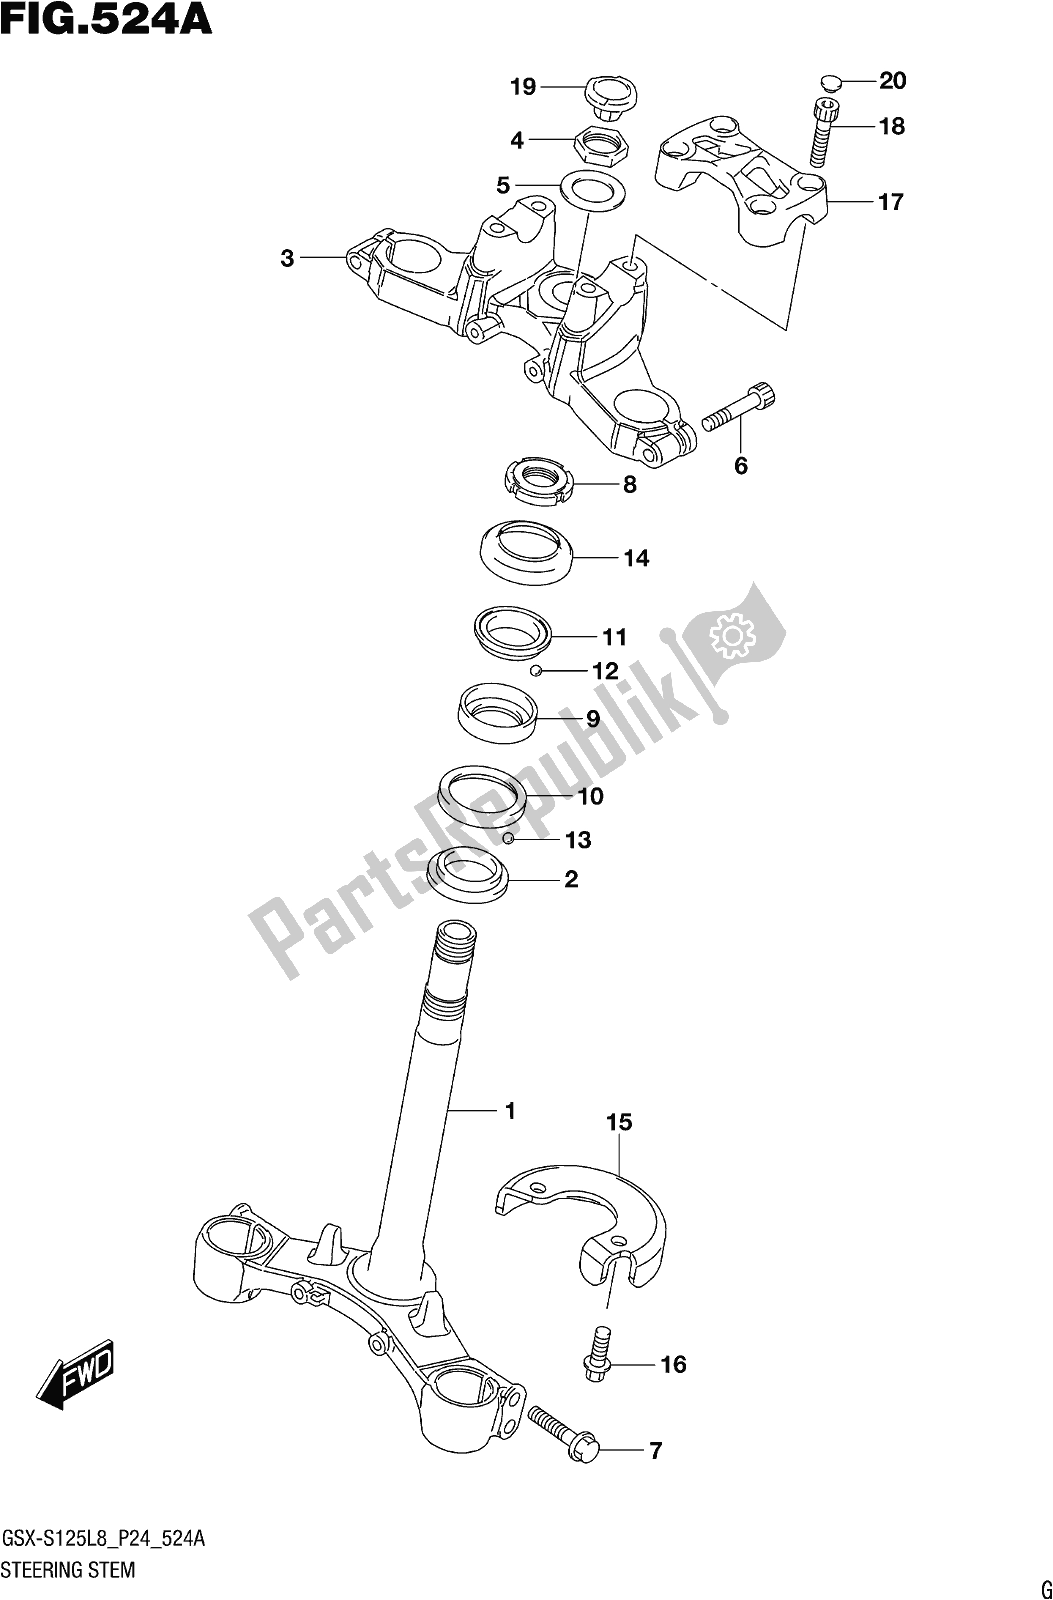 All parts for the Fig. 524a Steering Stem of the Suzuki Gsx-s 125 ML 2018